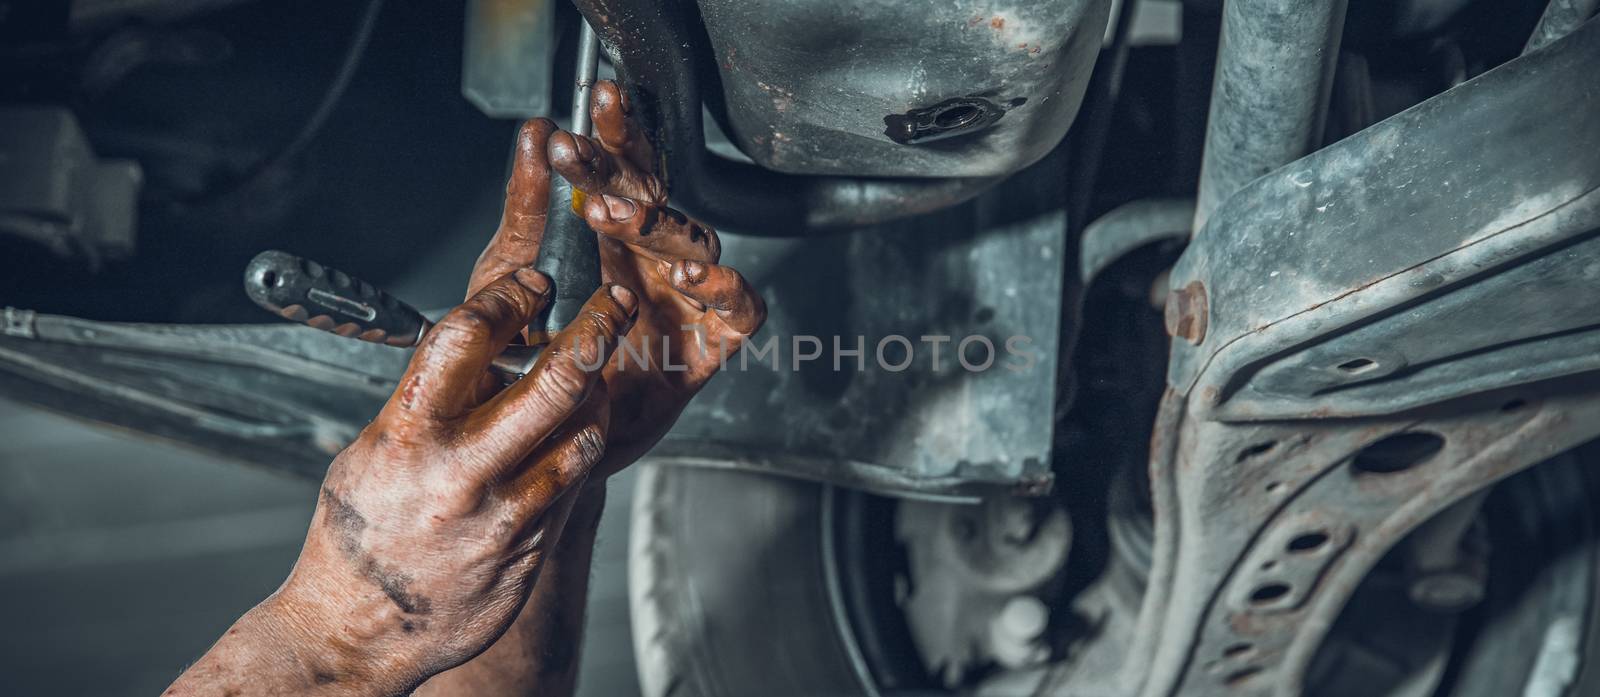 A car mechanic repairs a car at a car repair shop with a turnkey. close-up on hands.